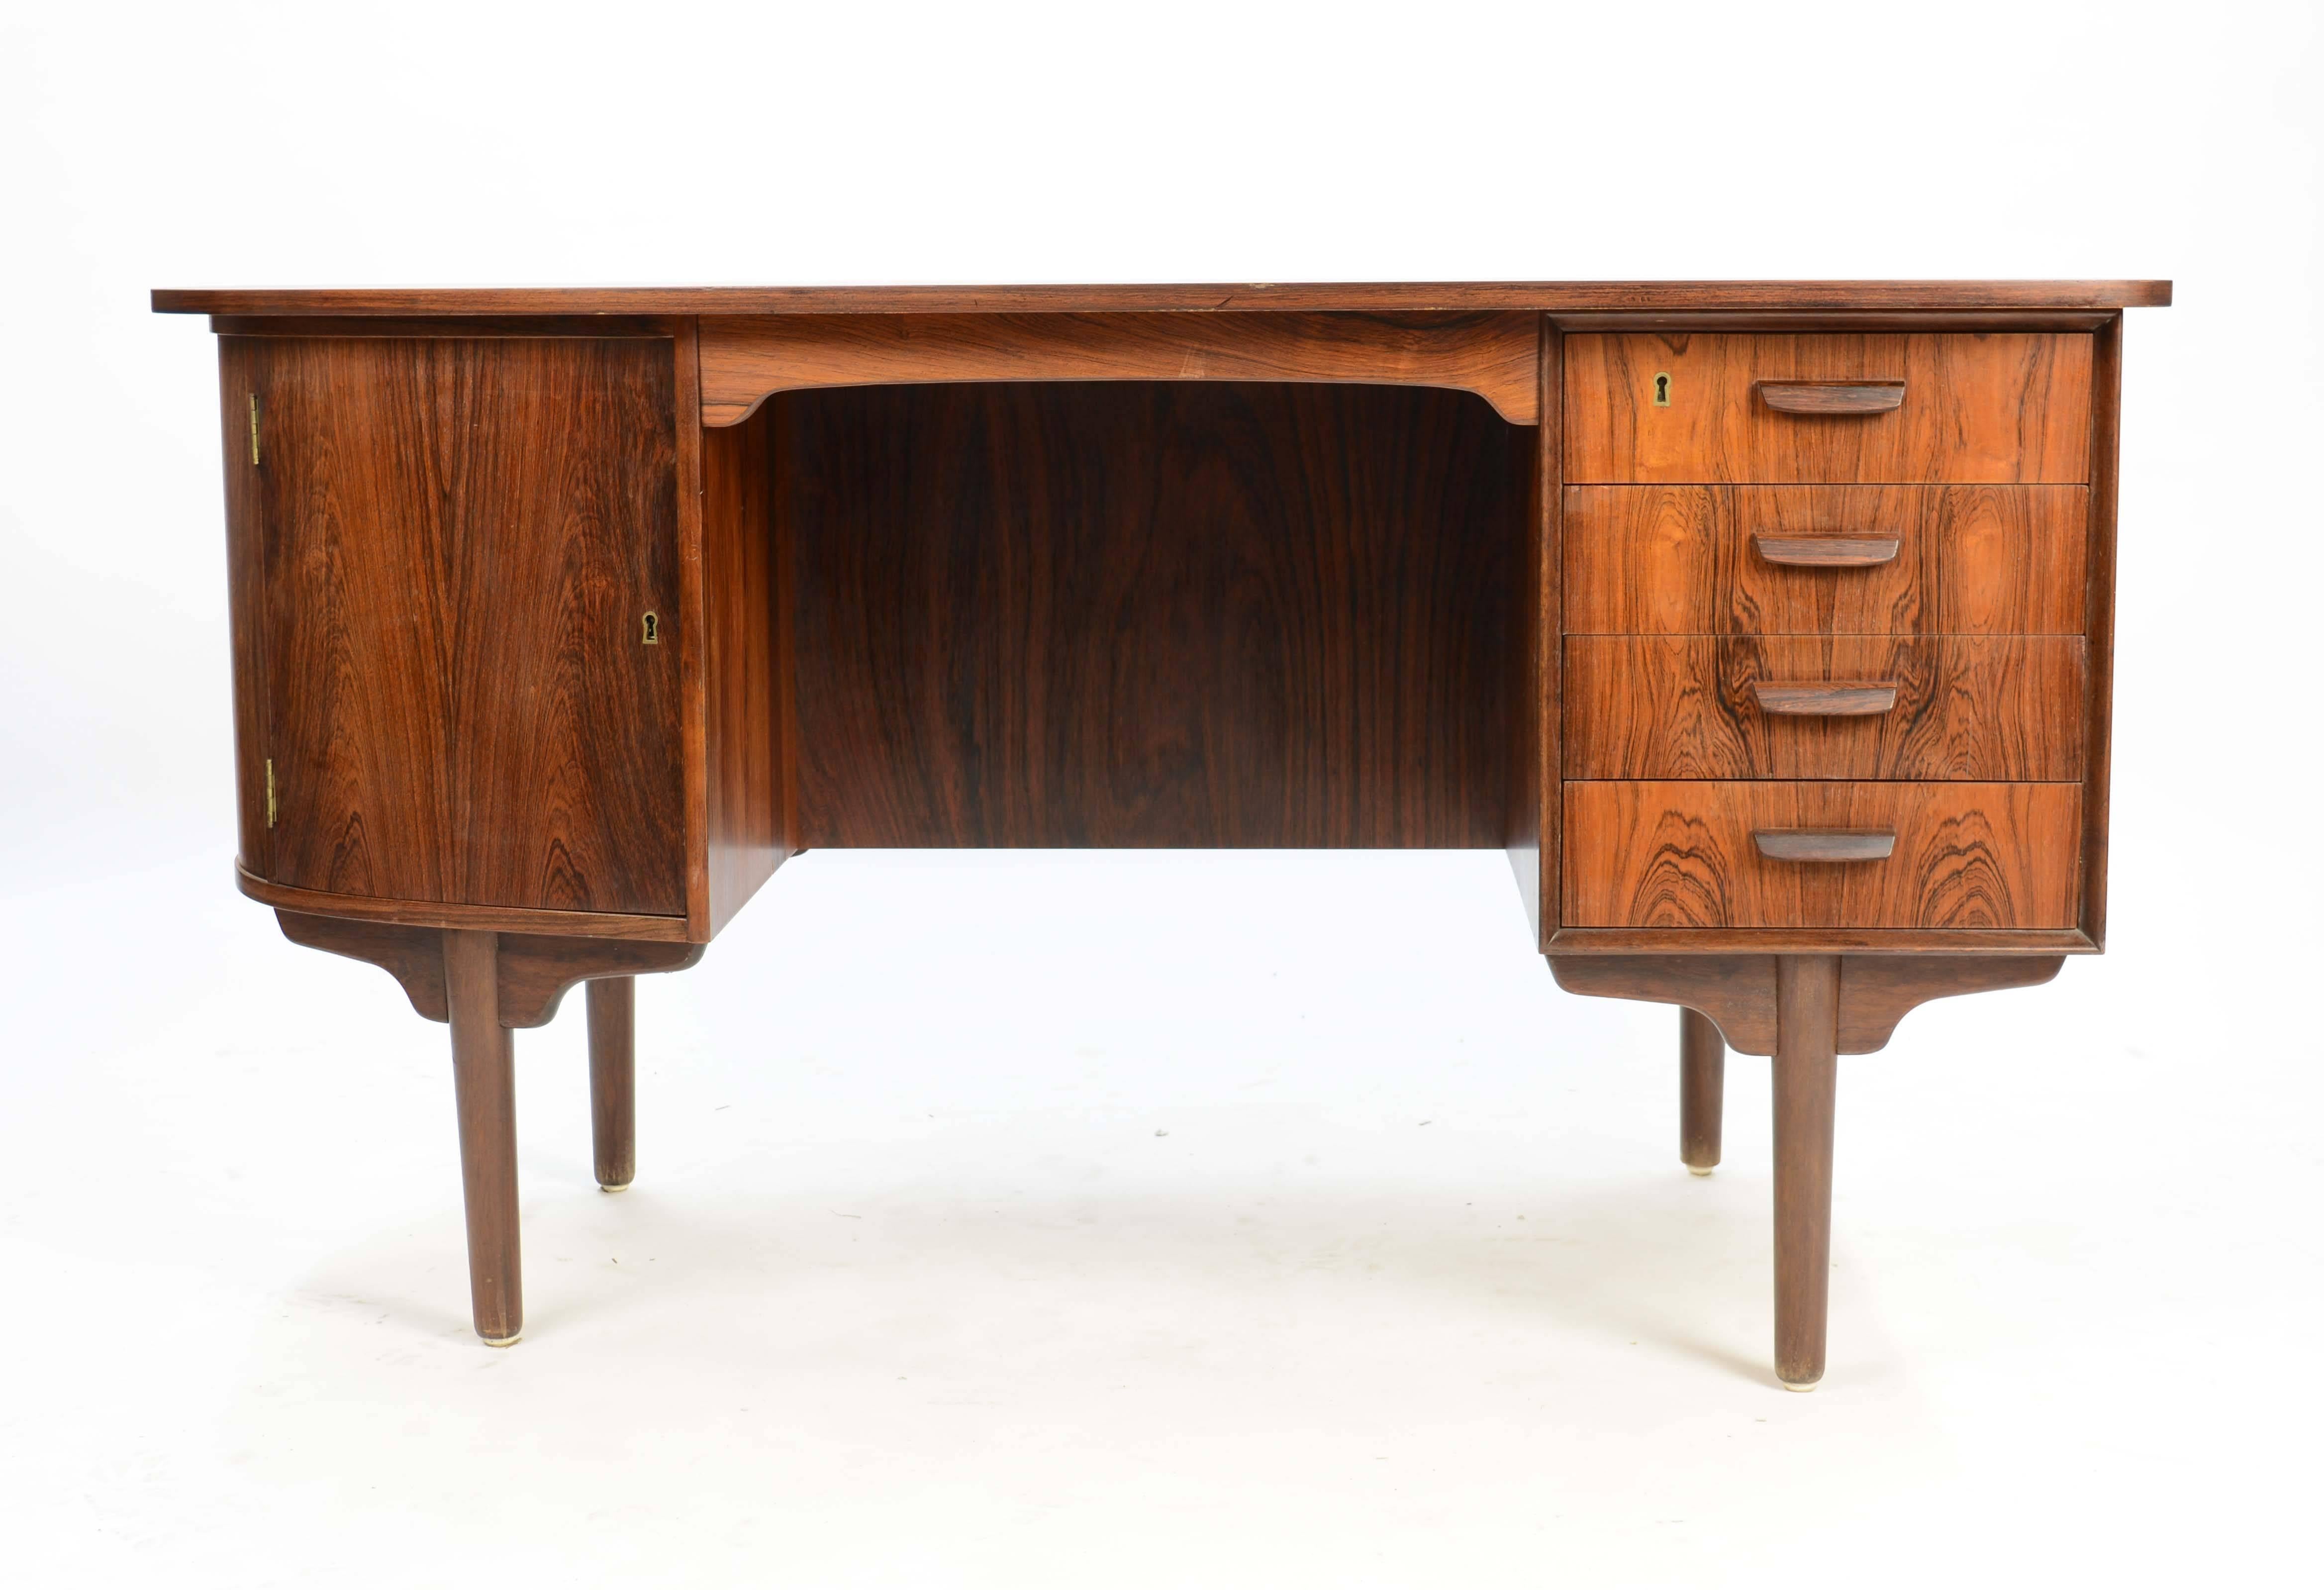 This stunning desk in covered in rosewood veneers that make it command attention for it's elegant and sophistication of Danish design and craftmanship. The desk featured built in bookcase and cabinets. It has two locking bookcase and four drawers.